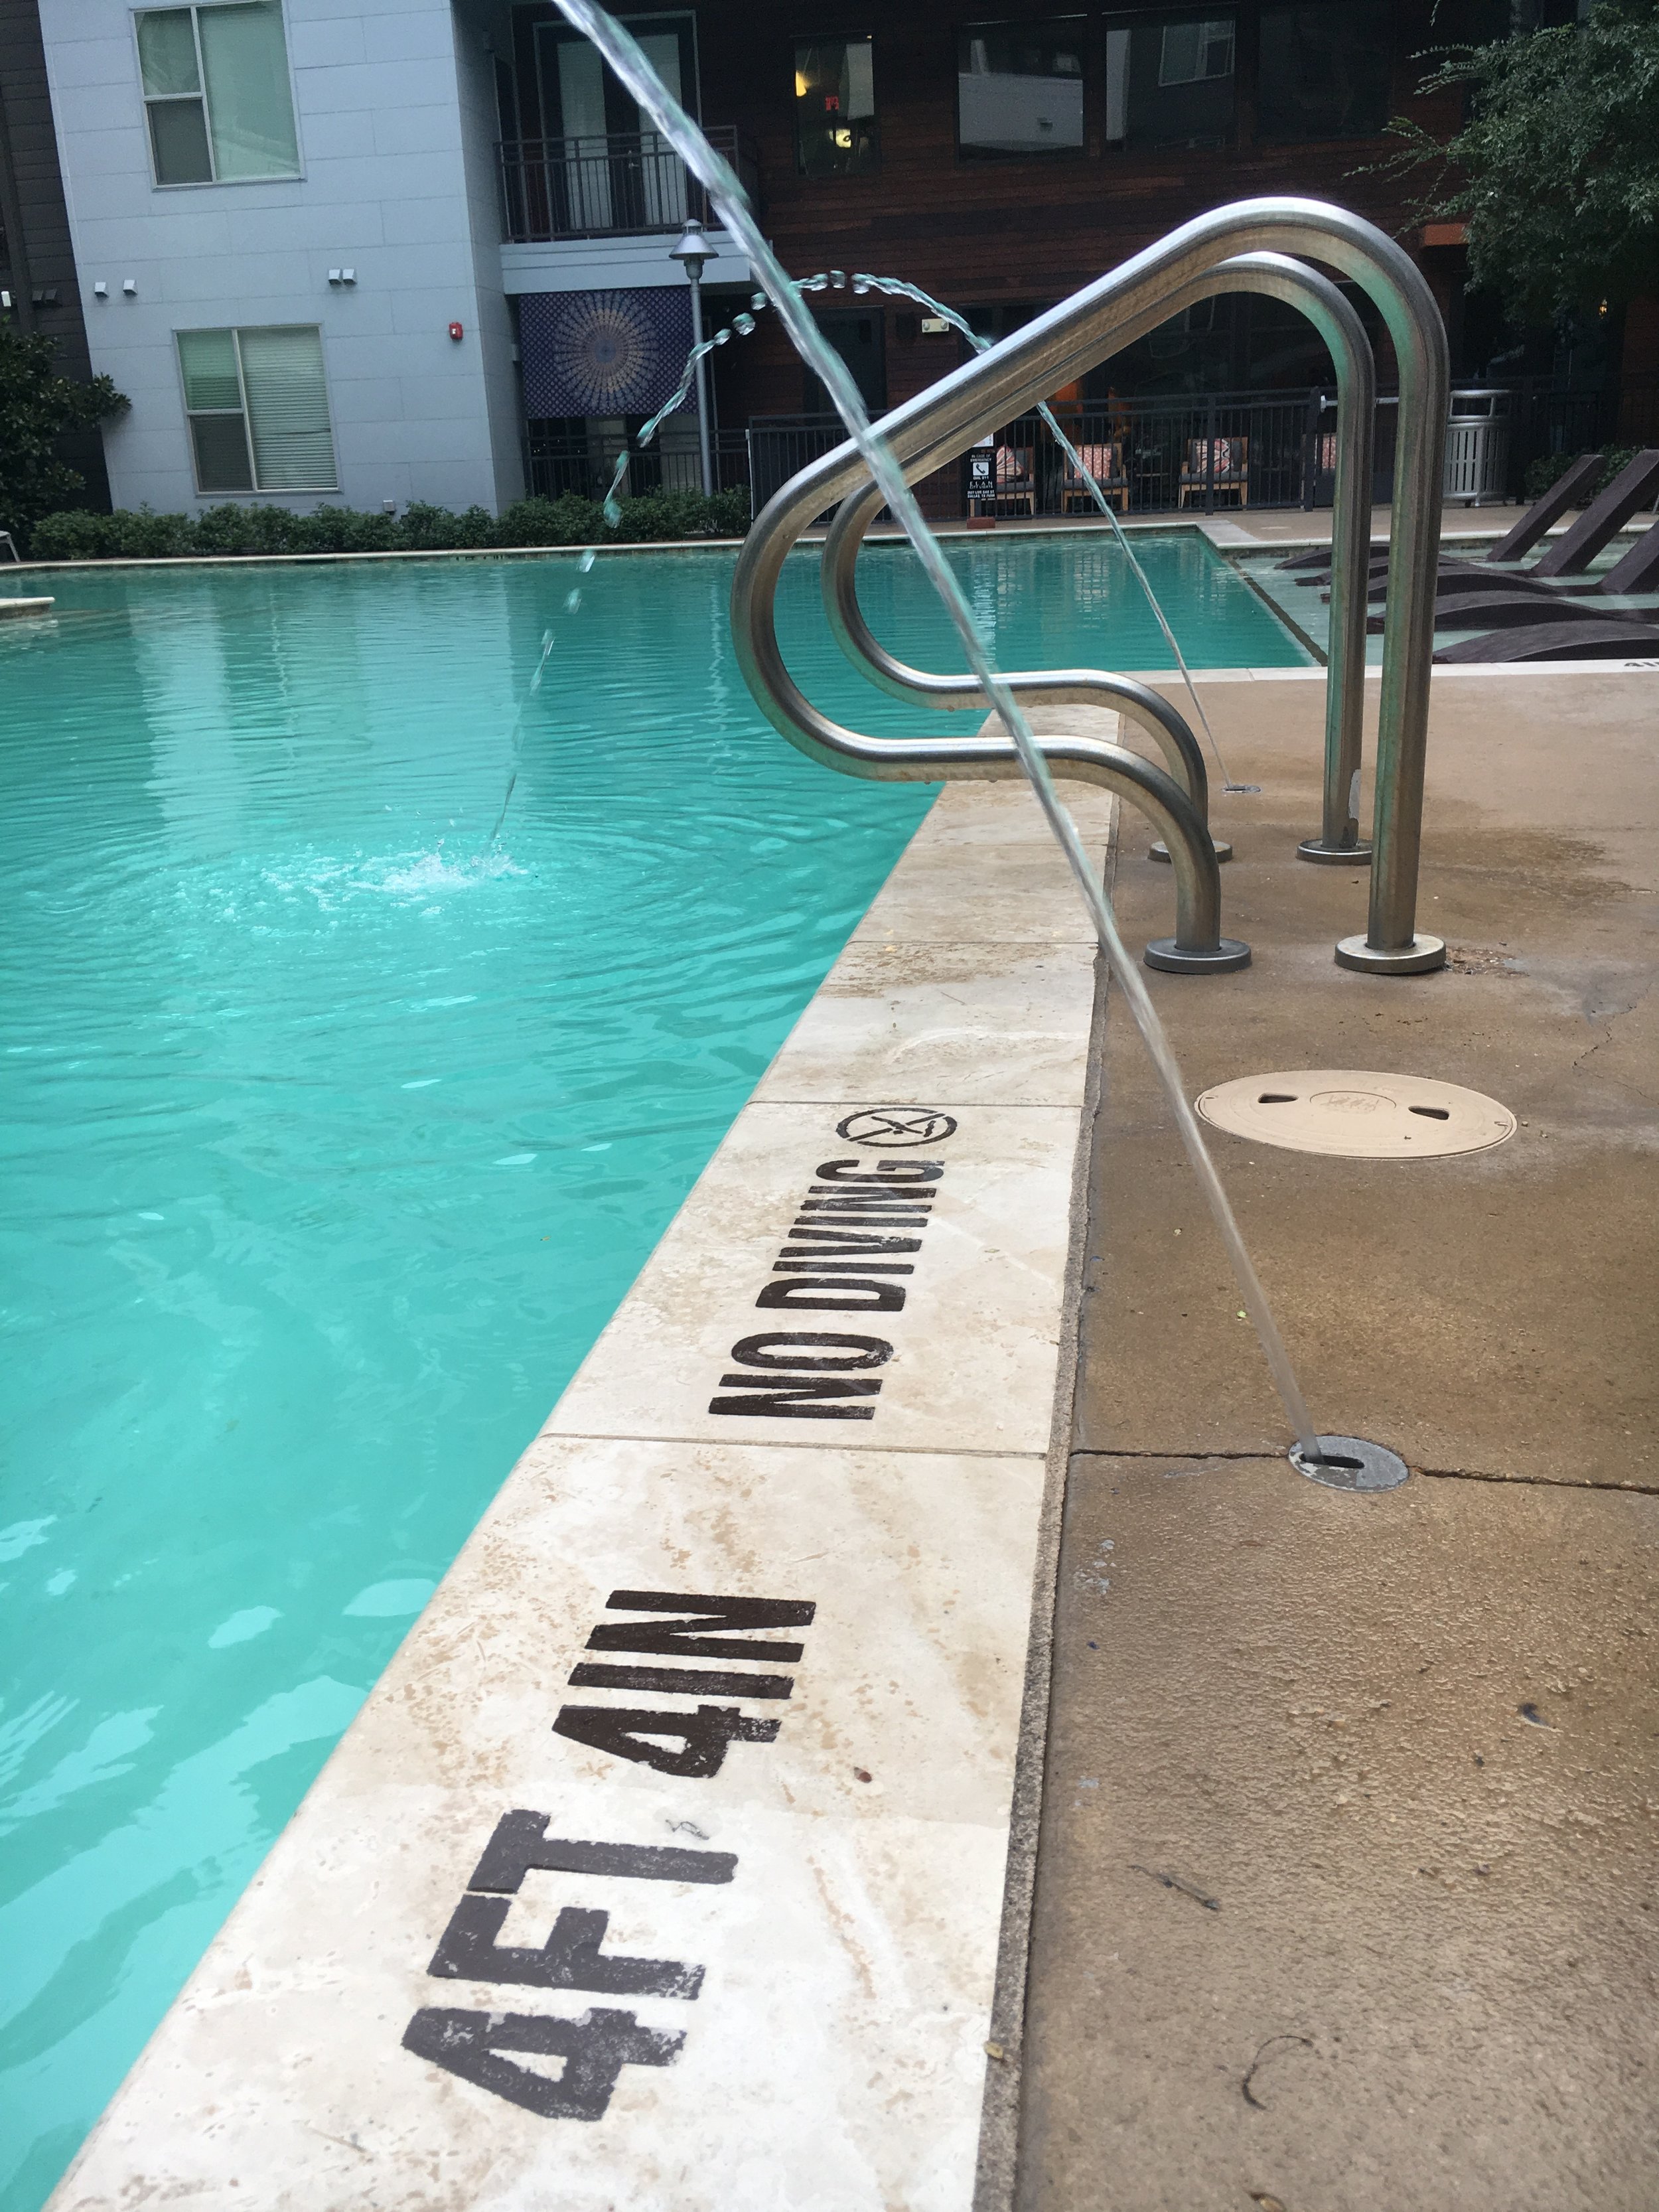 etched pool depth markers